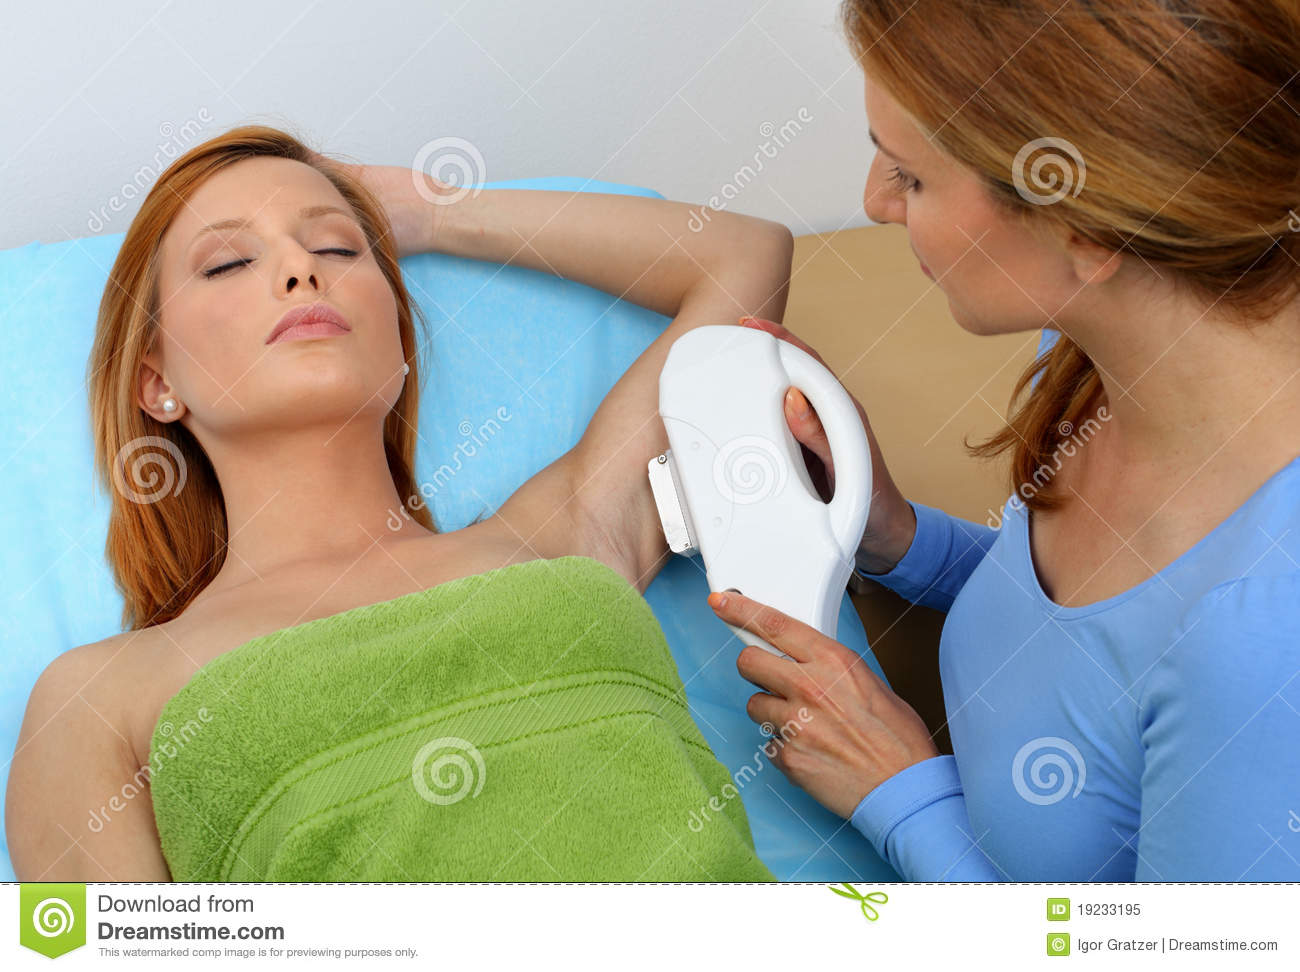 Laser Hair Removal Royalty Free Stock Photo   Image  19233195